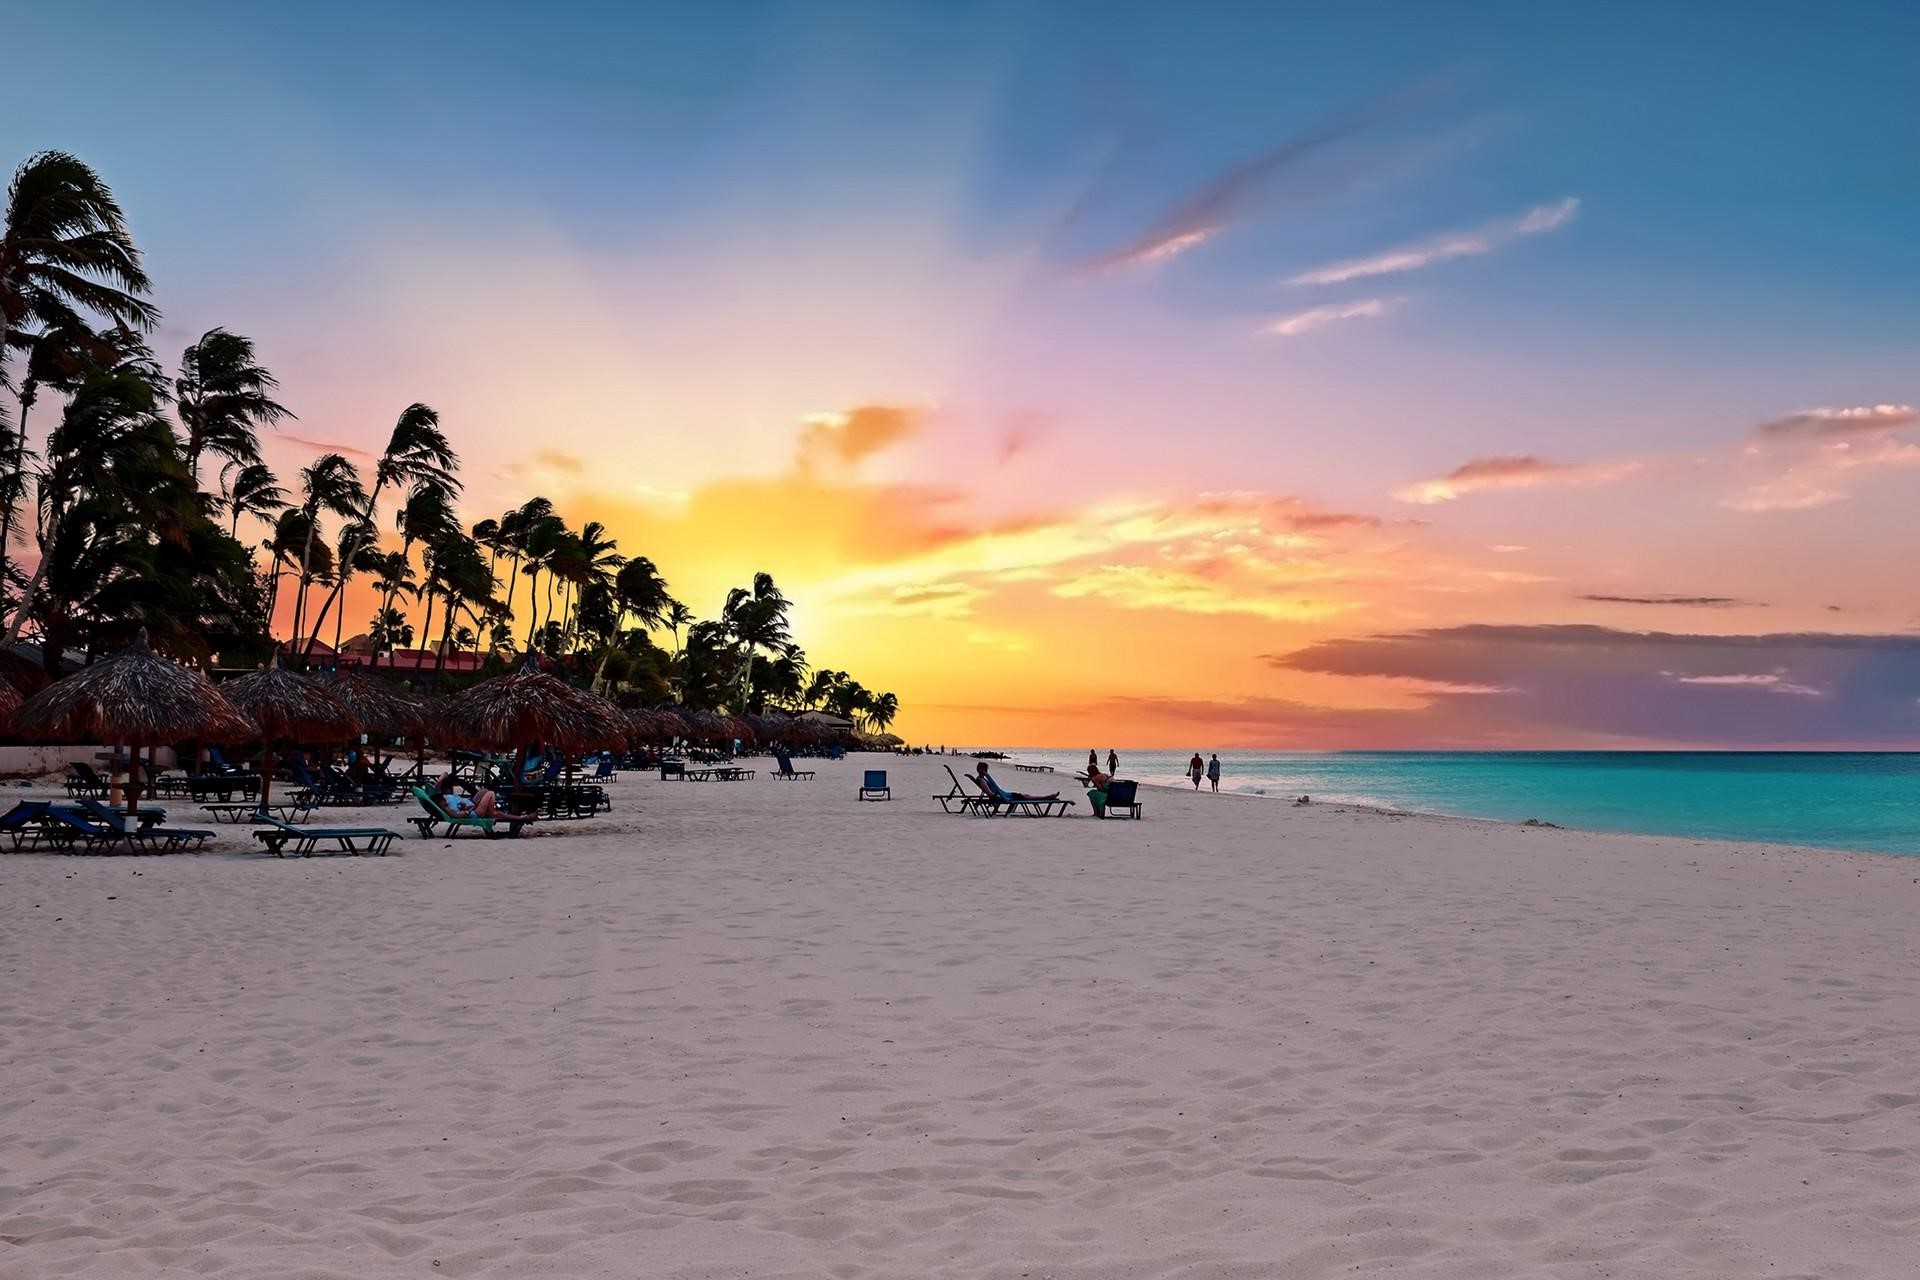 December Weather In Aruba: What To Expect